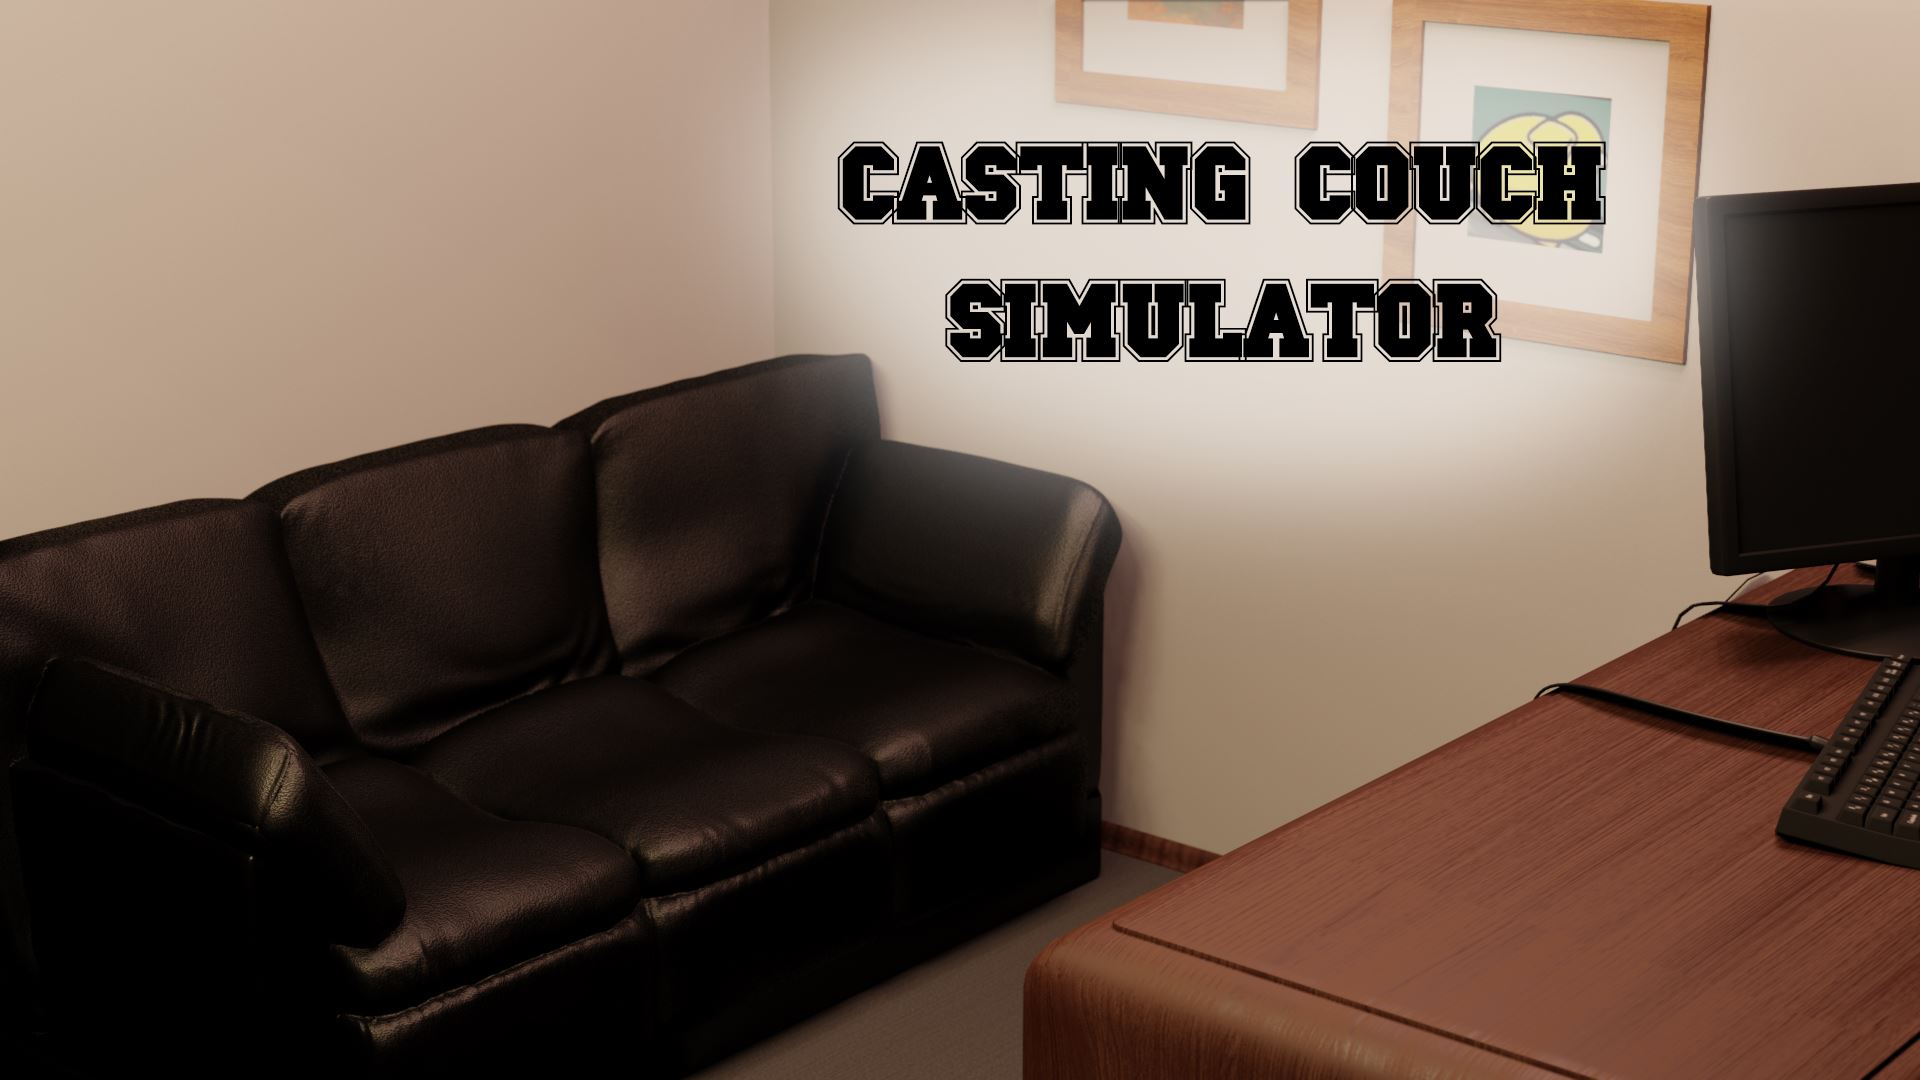 Casting Couch Simulator porn xxx game download cover